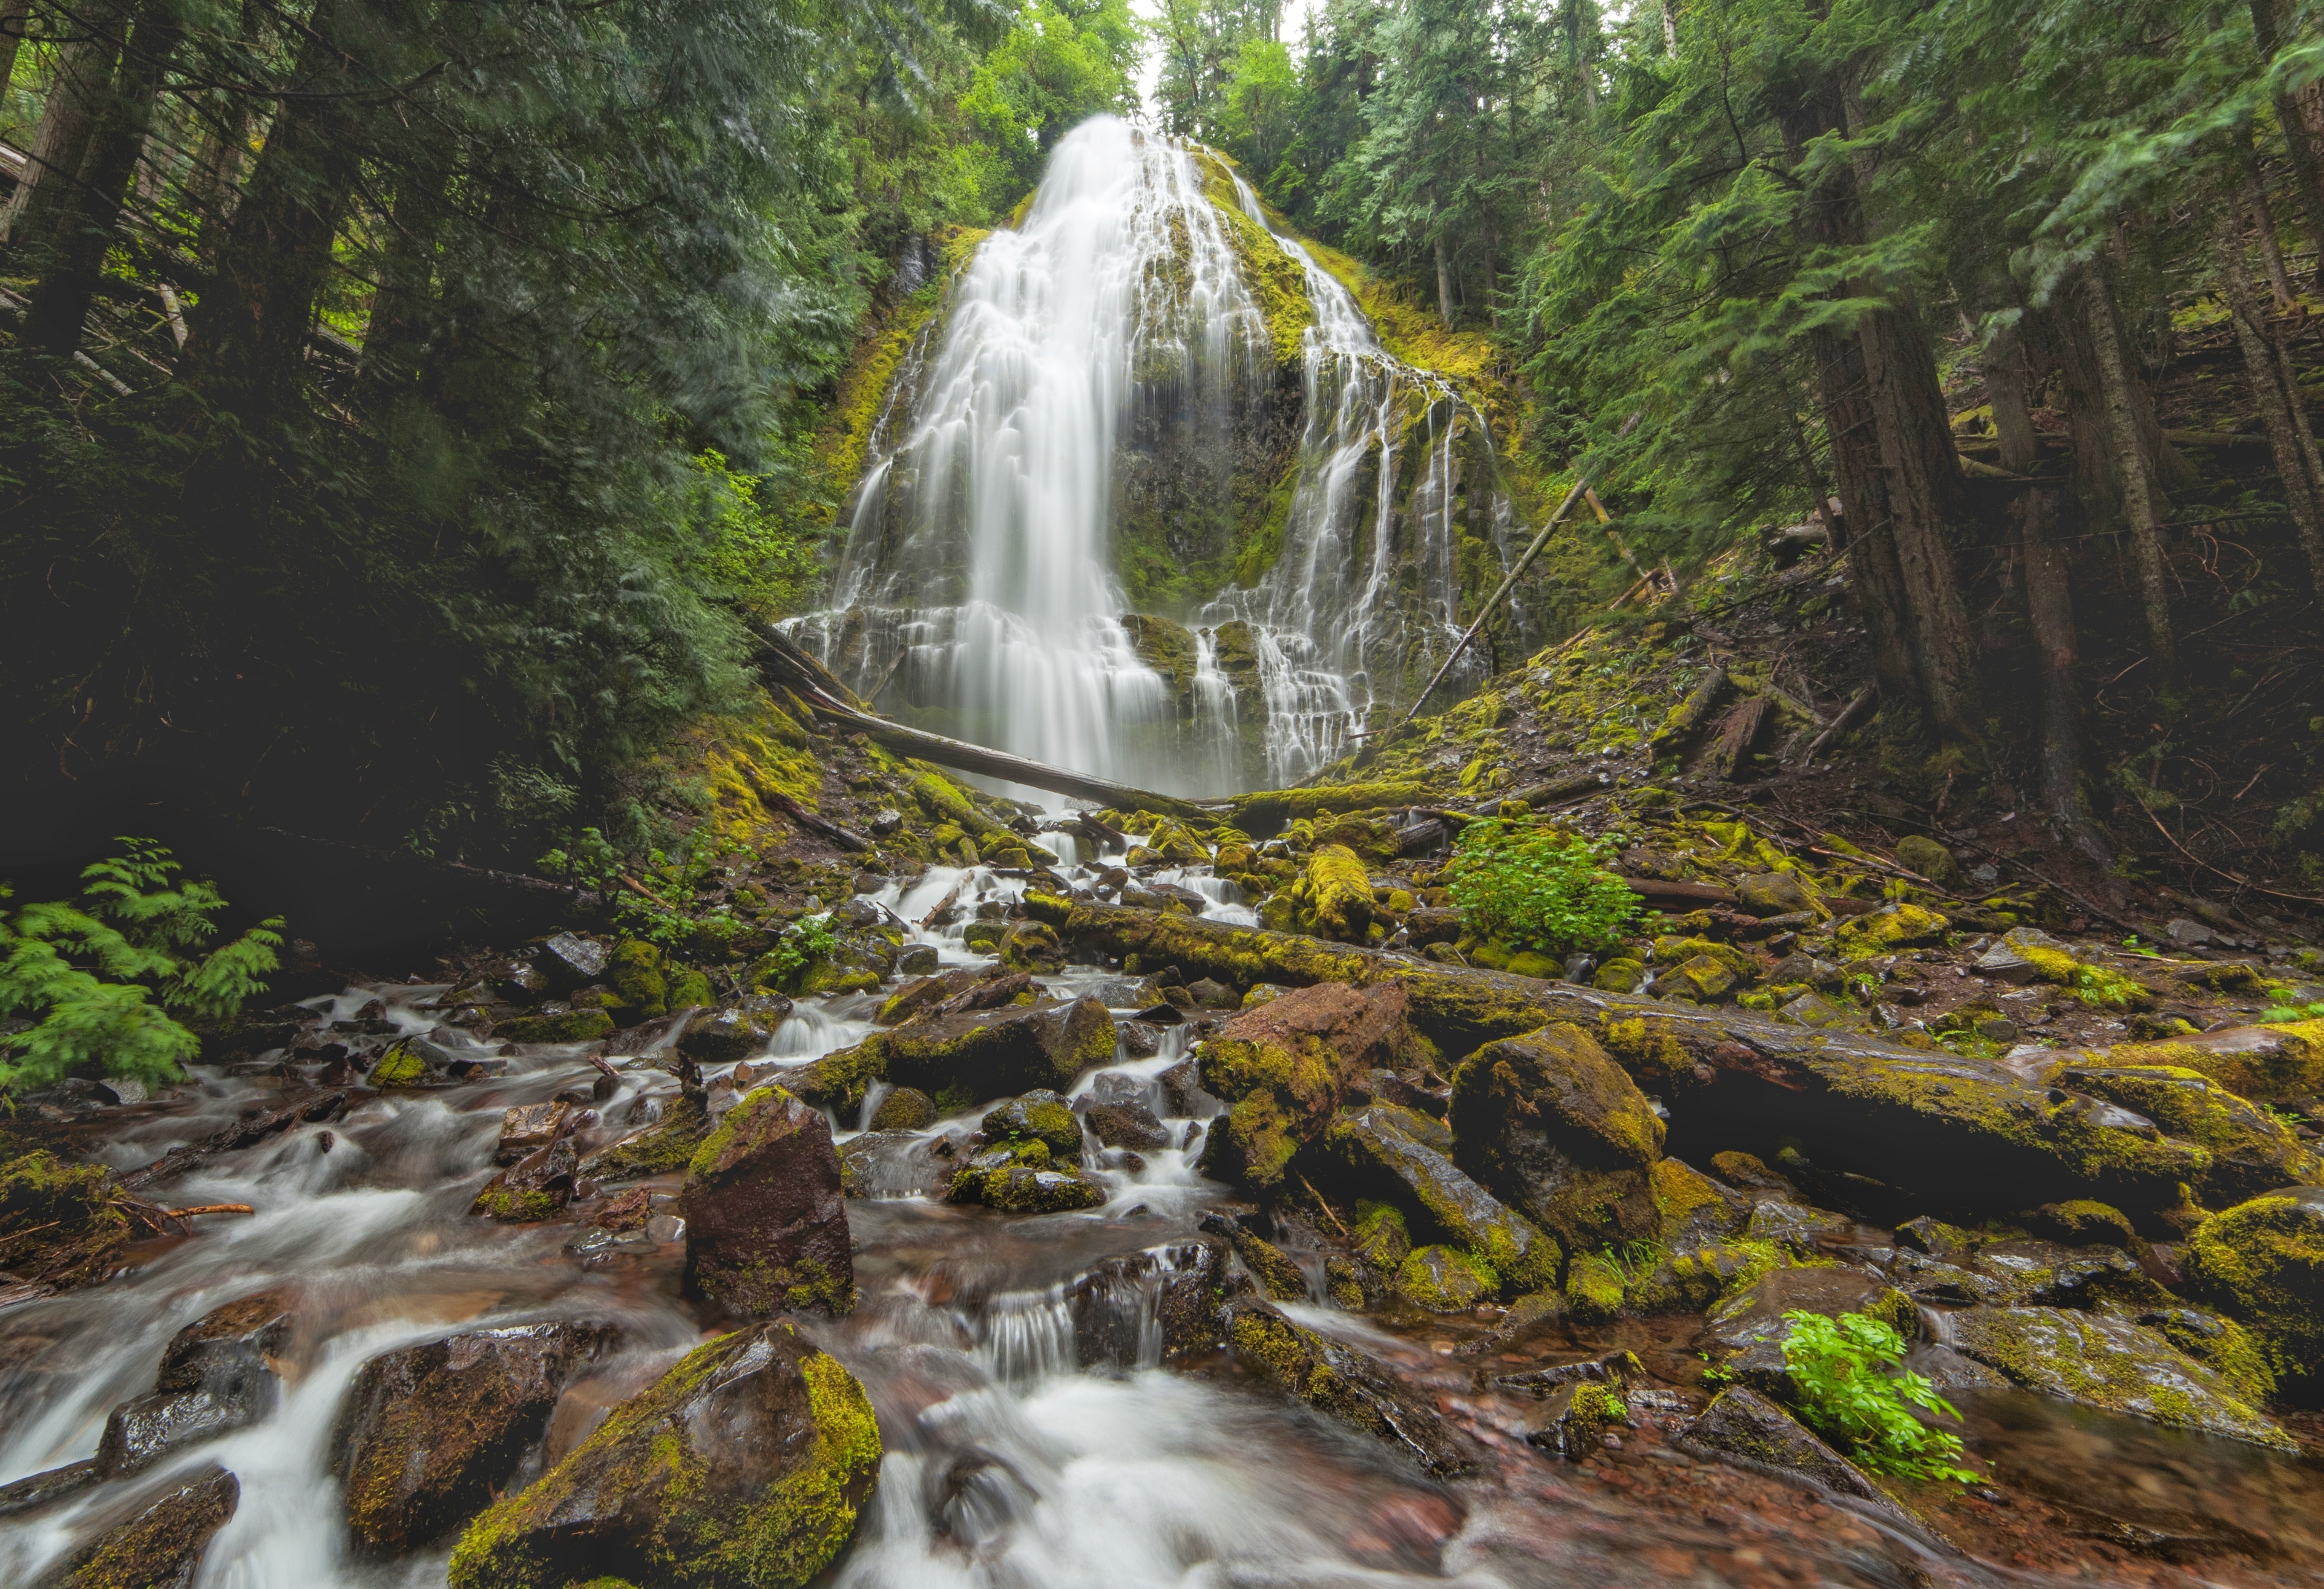 Short hike to a beautiful waterfall.
#ADVENTURE PHOTO CONTEST